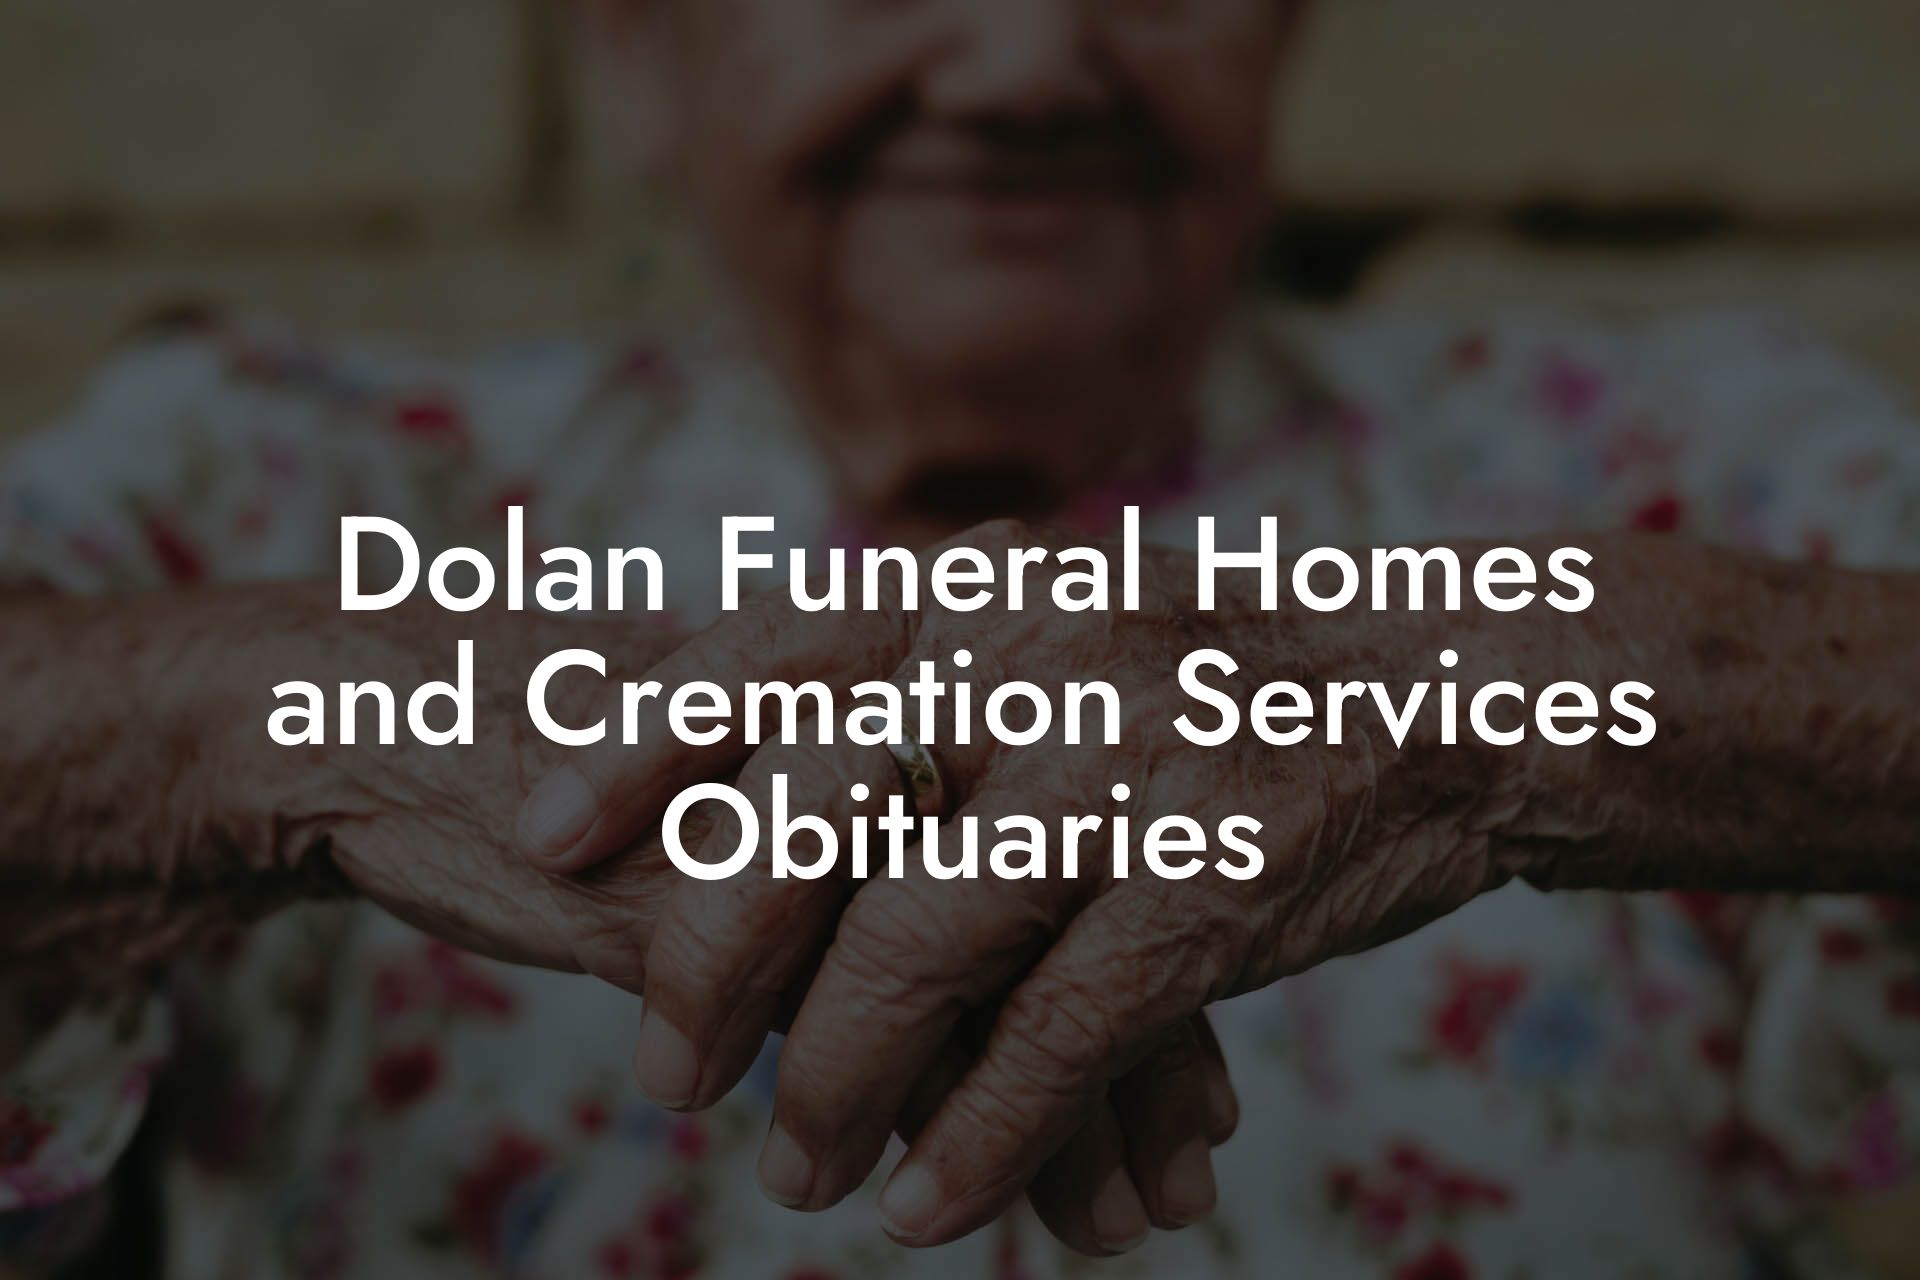 Dolan Funeral Homes and Cremation Services Obituaries